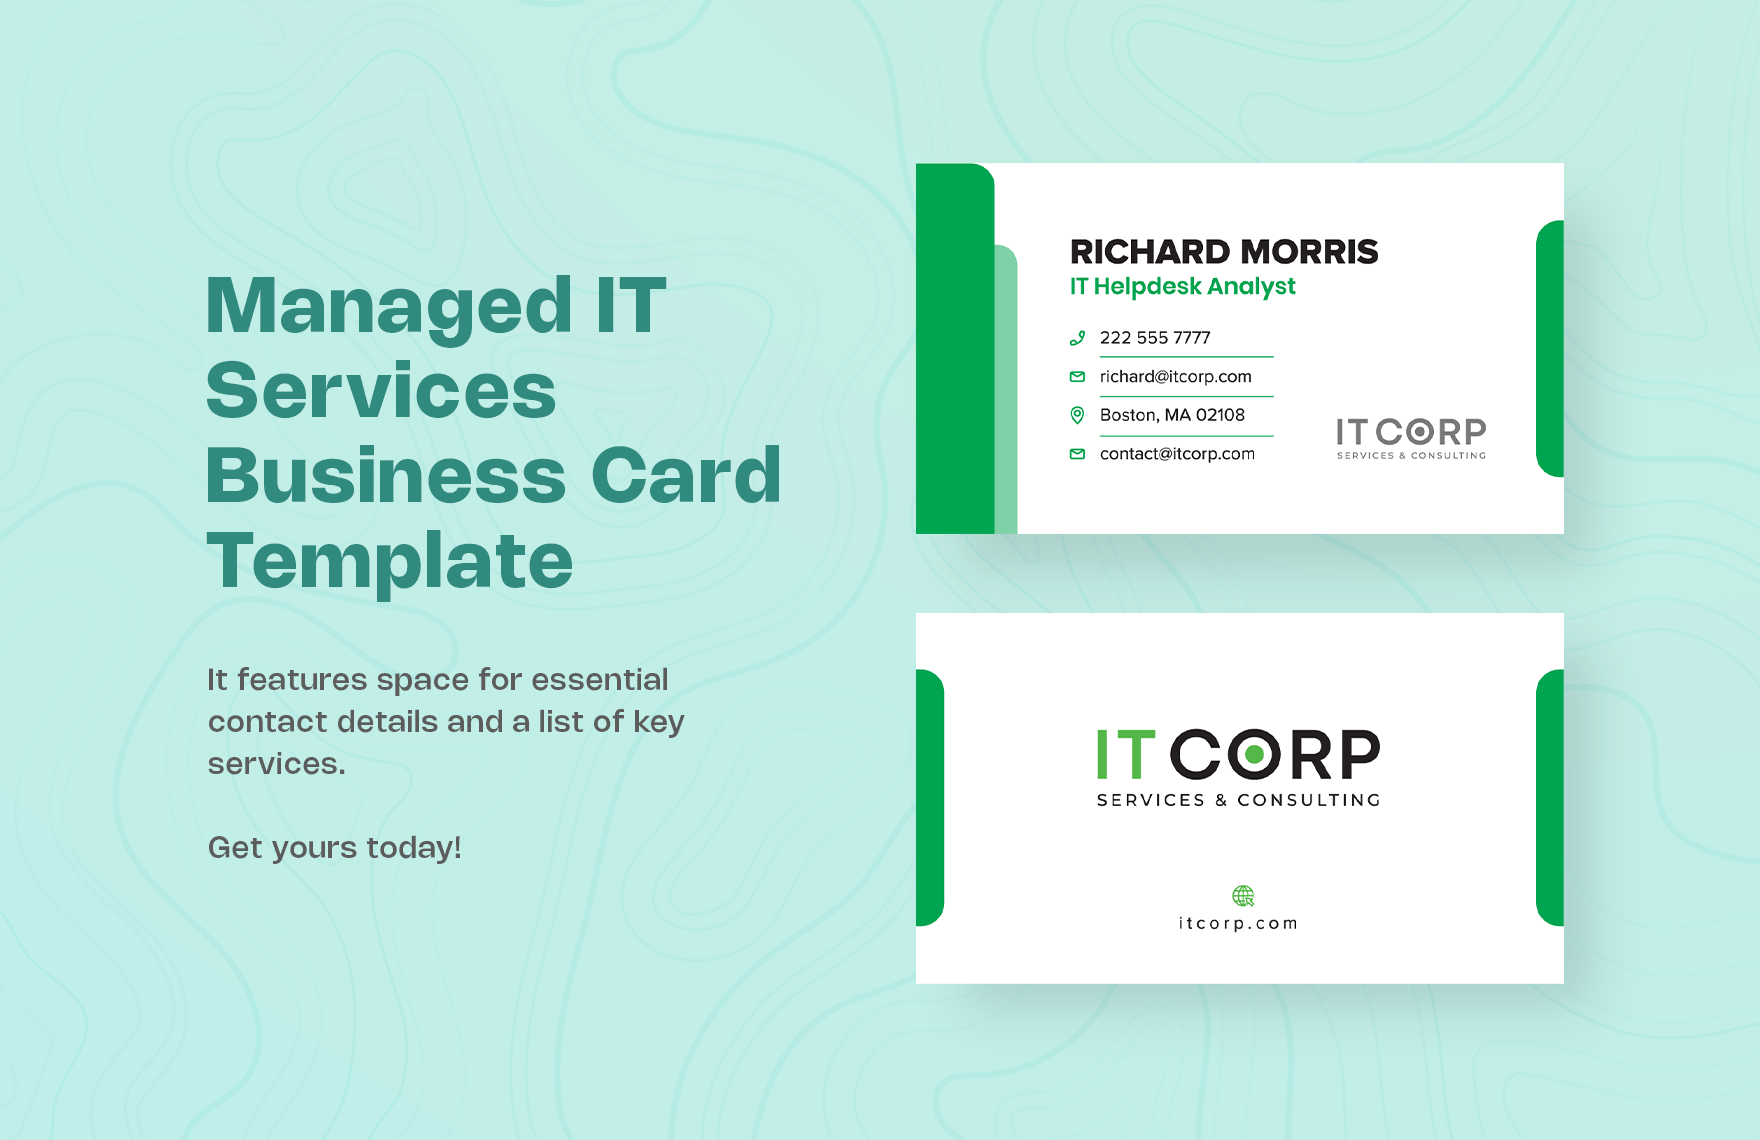 Managed IT Services Business Card Template